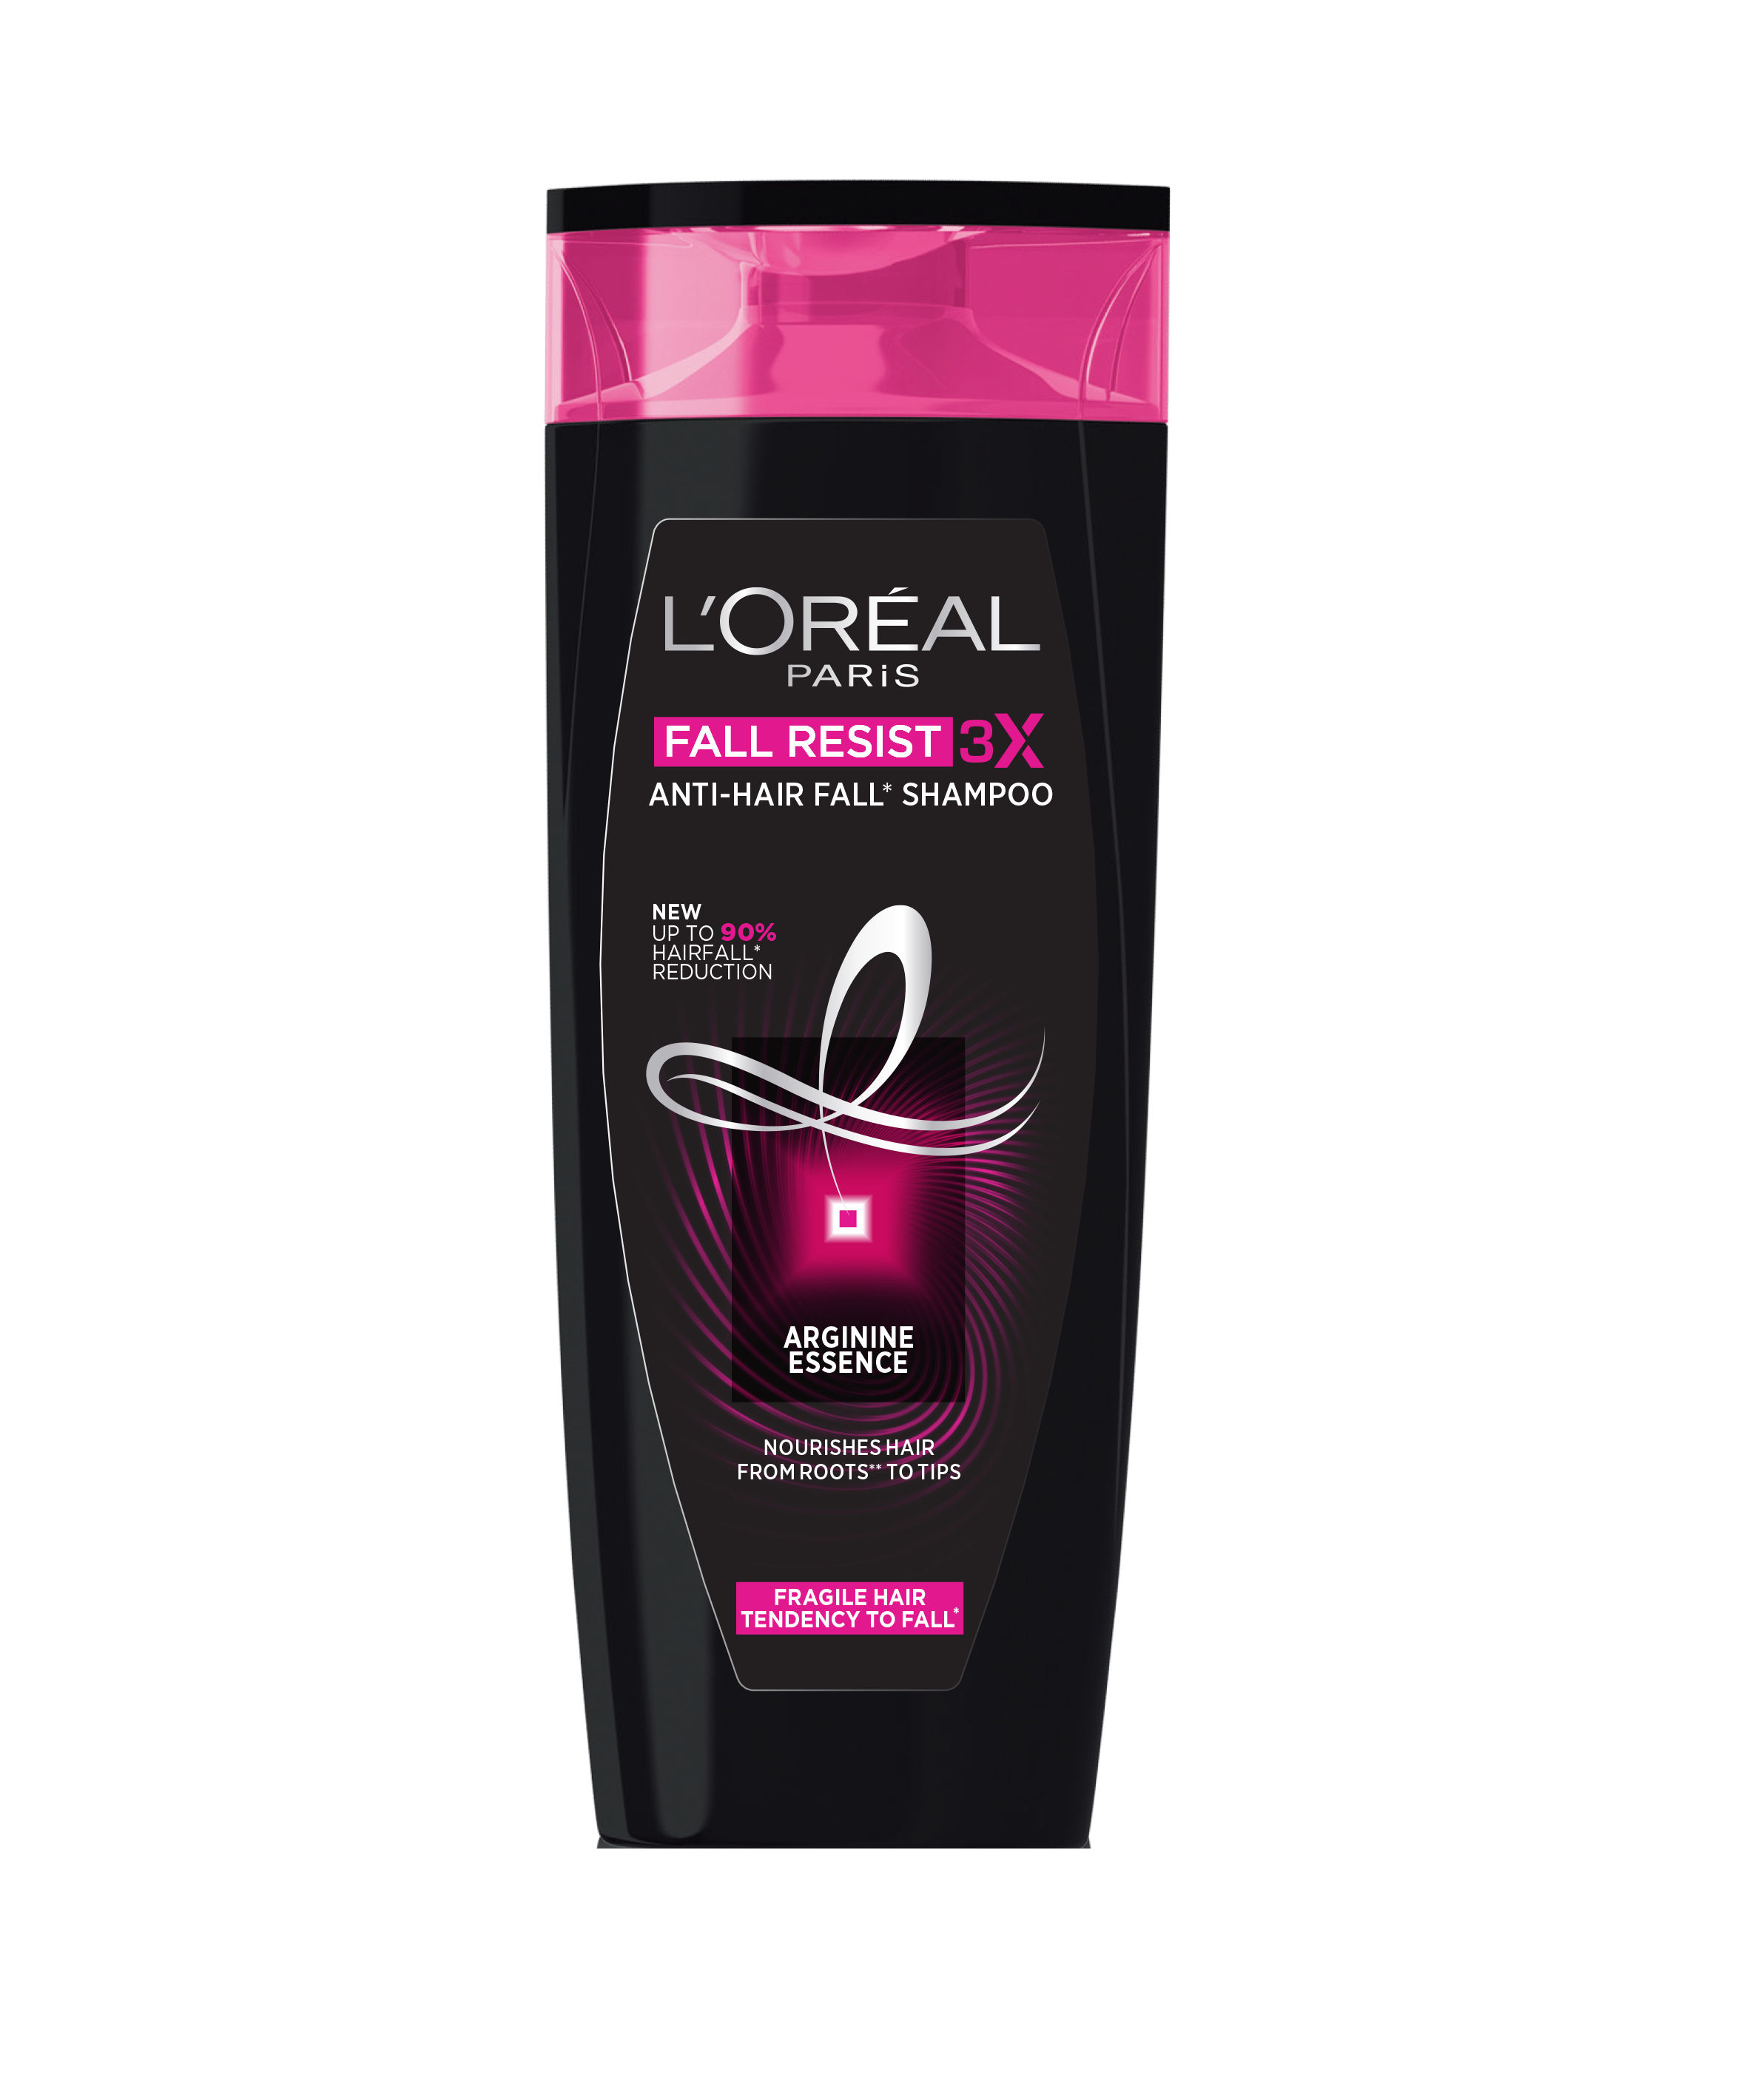 Buy L'oreal Paris Fall Resist 3X - Hair Fall Shampoo online United States of America | Free Expedited shipping - Indian Mall US